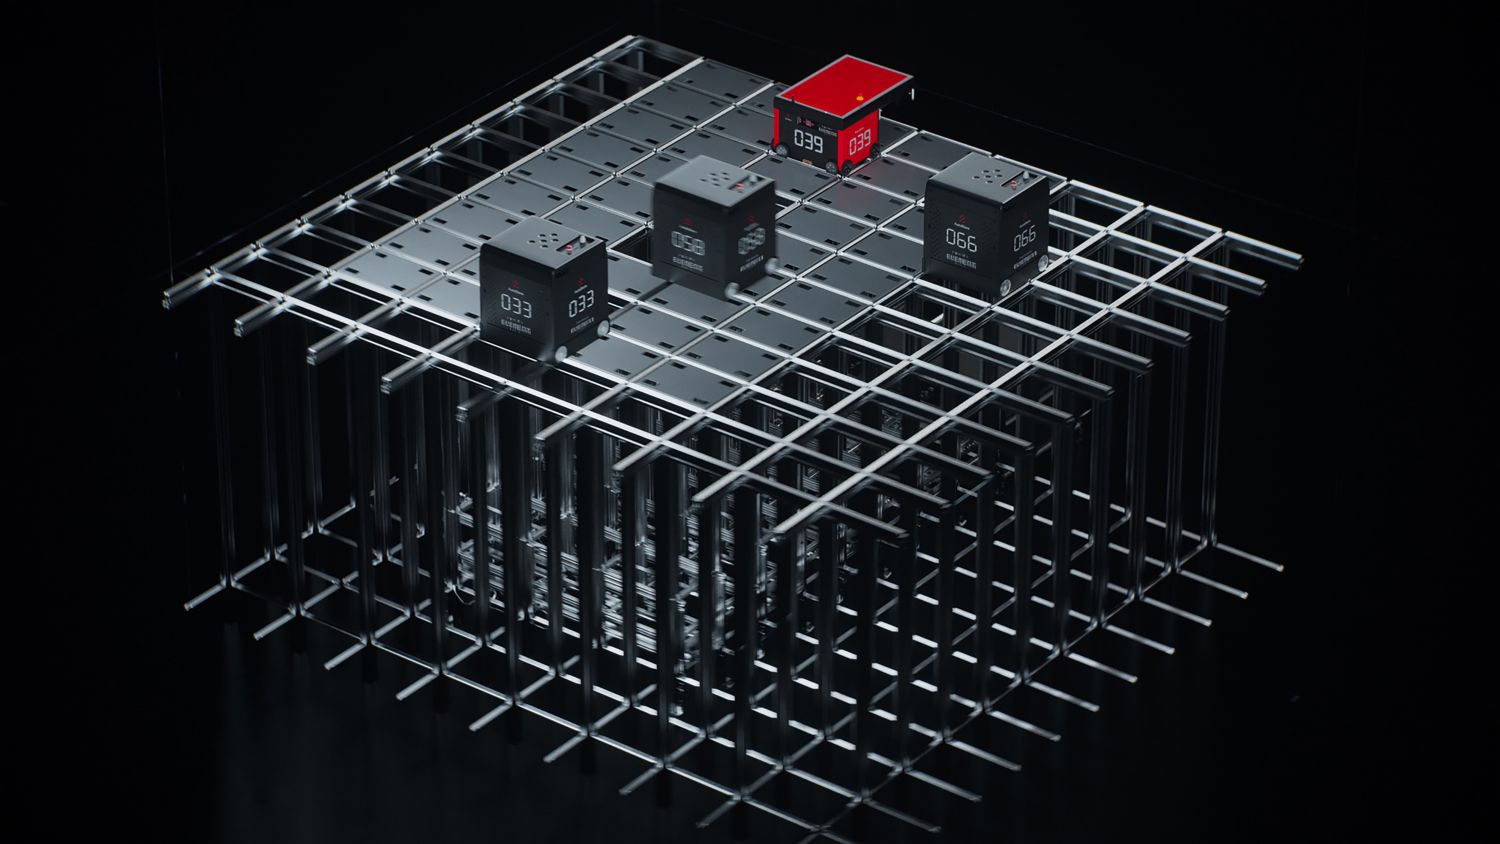 AutoStore Grid Illustration with Black Line Robots on Top of the Grid